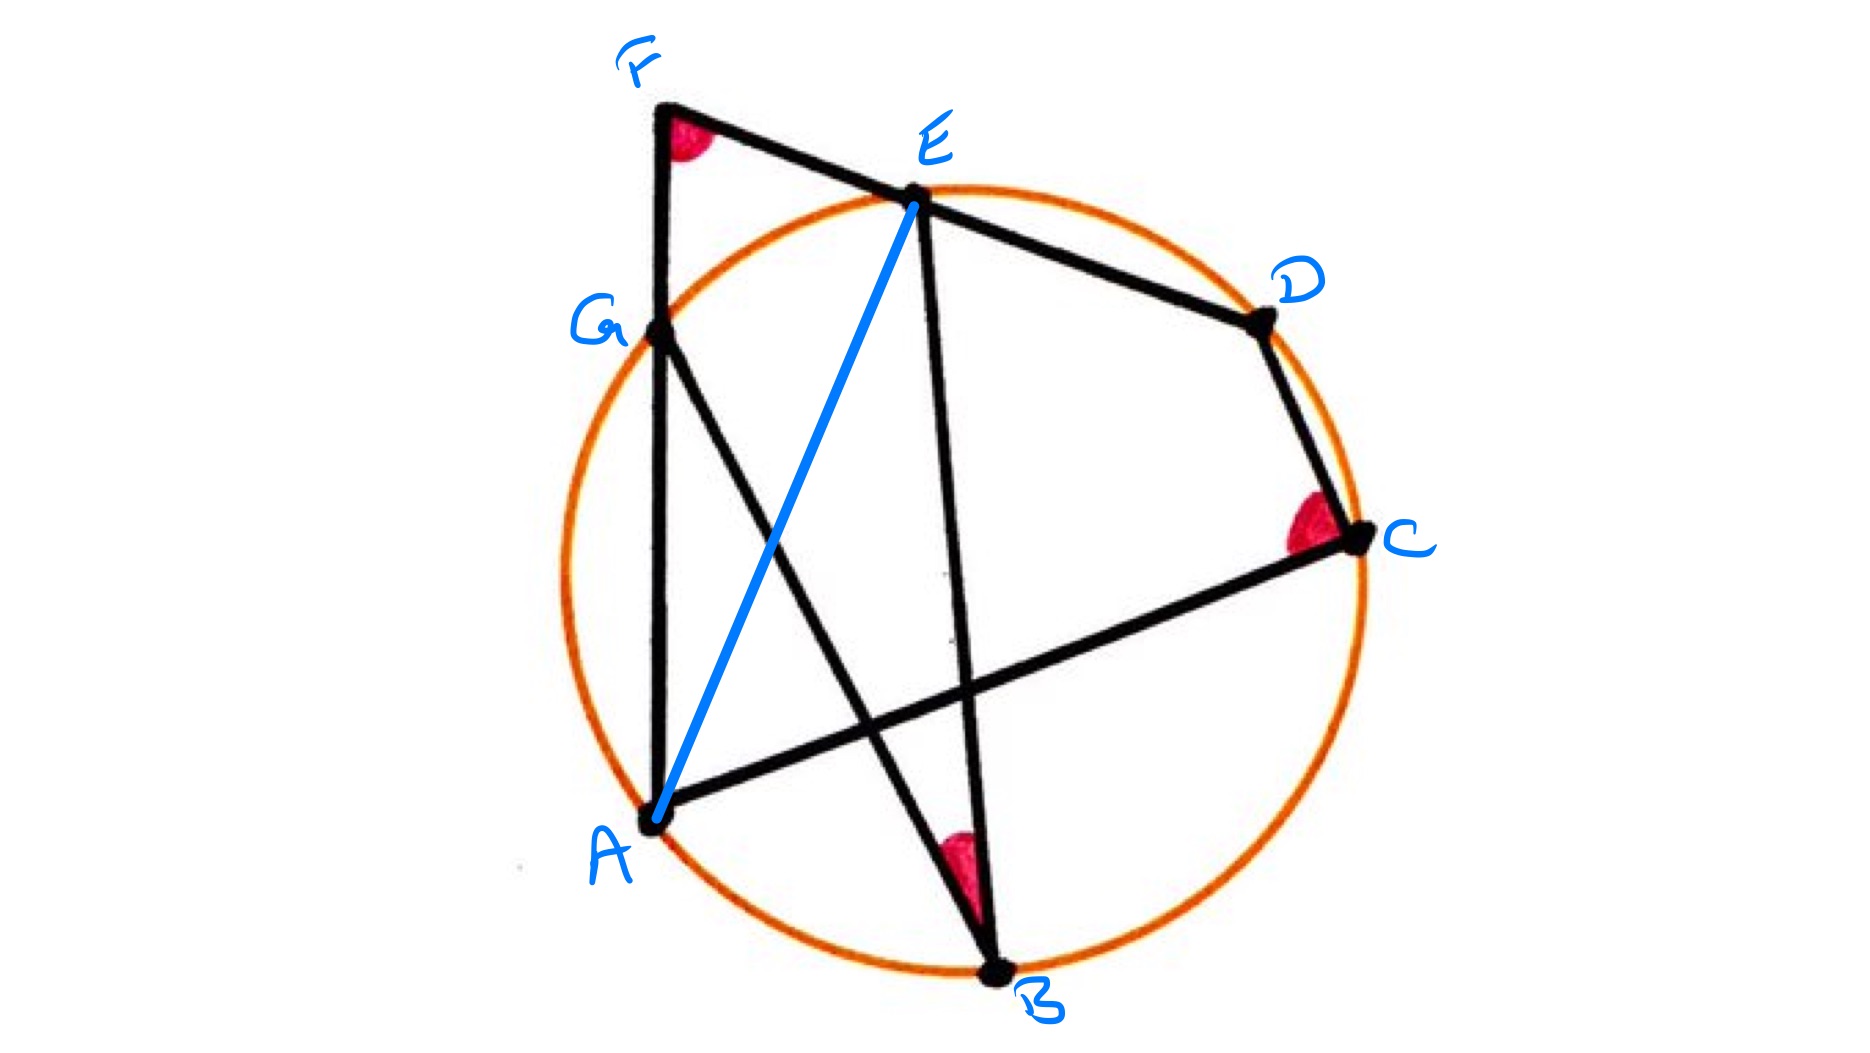 Angles in a circle labelled 